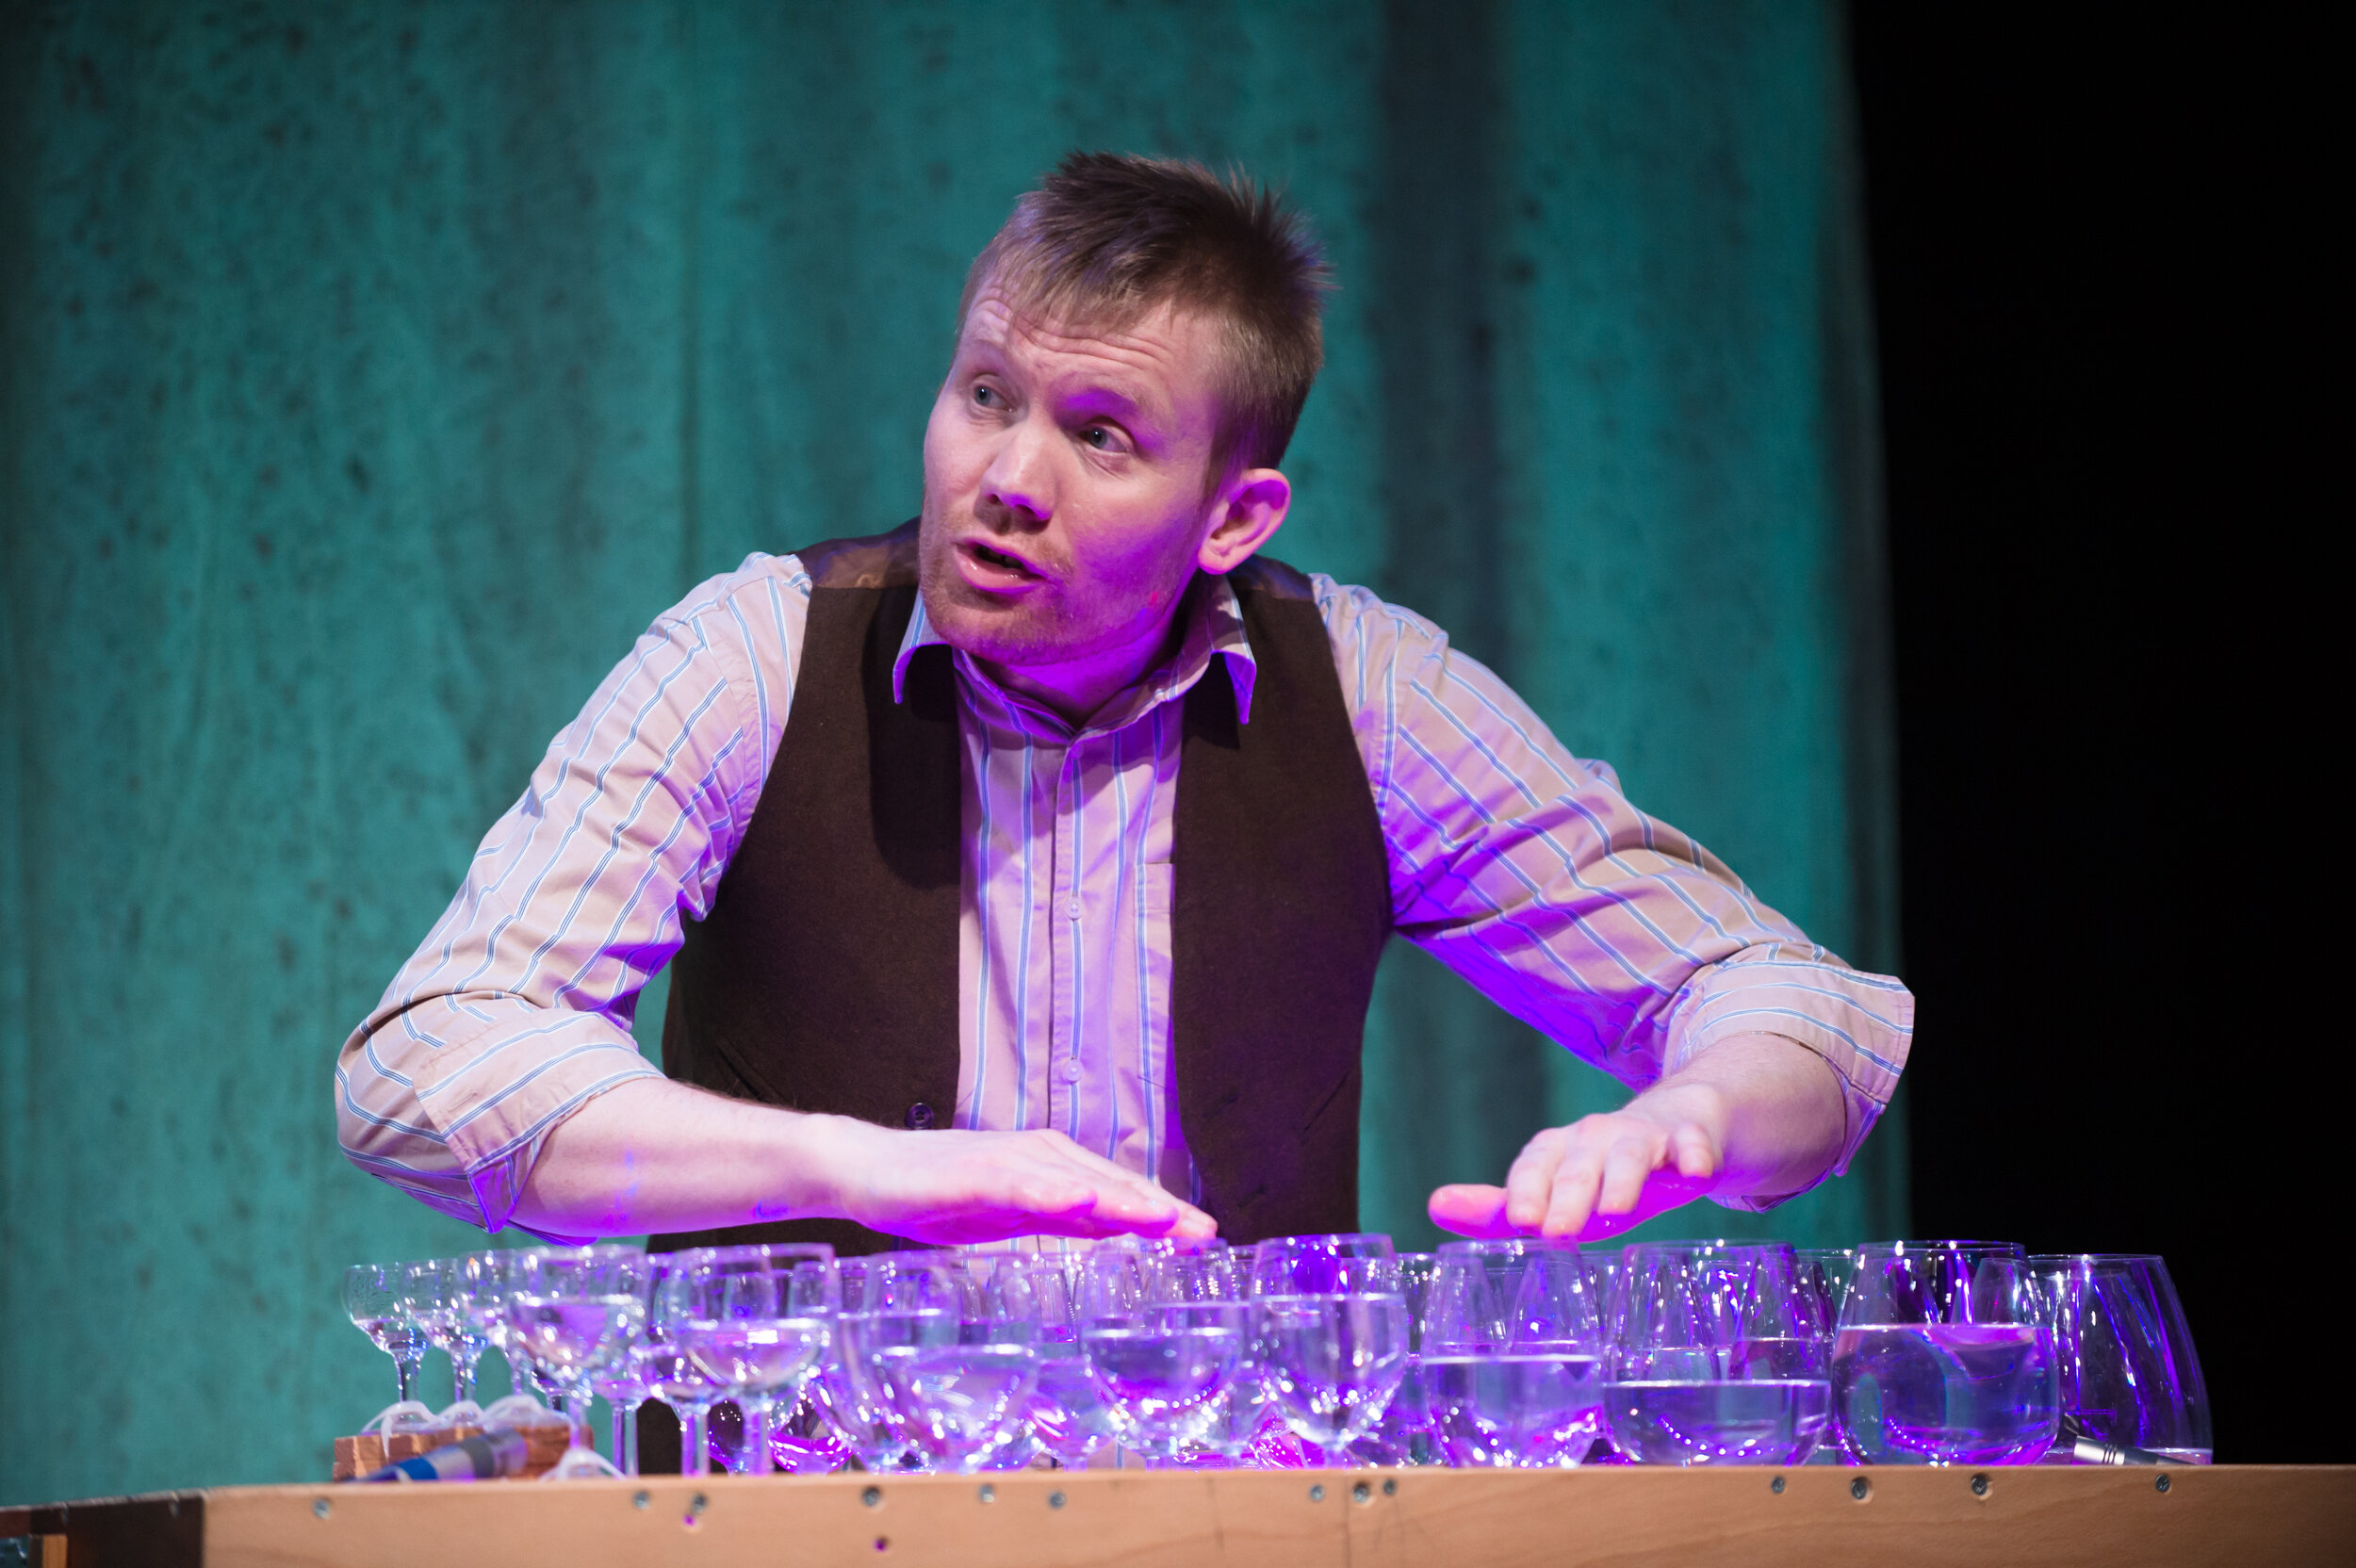  A table arranged with wine glasses filled with water, being played with fingers. 